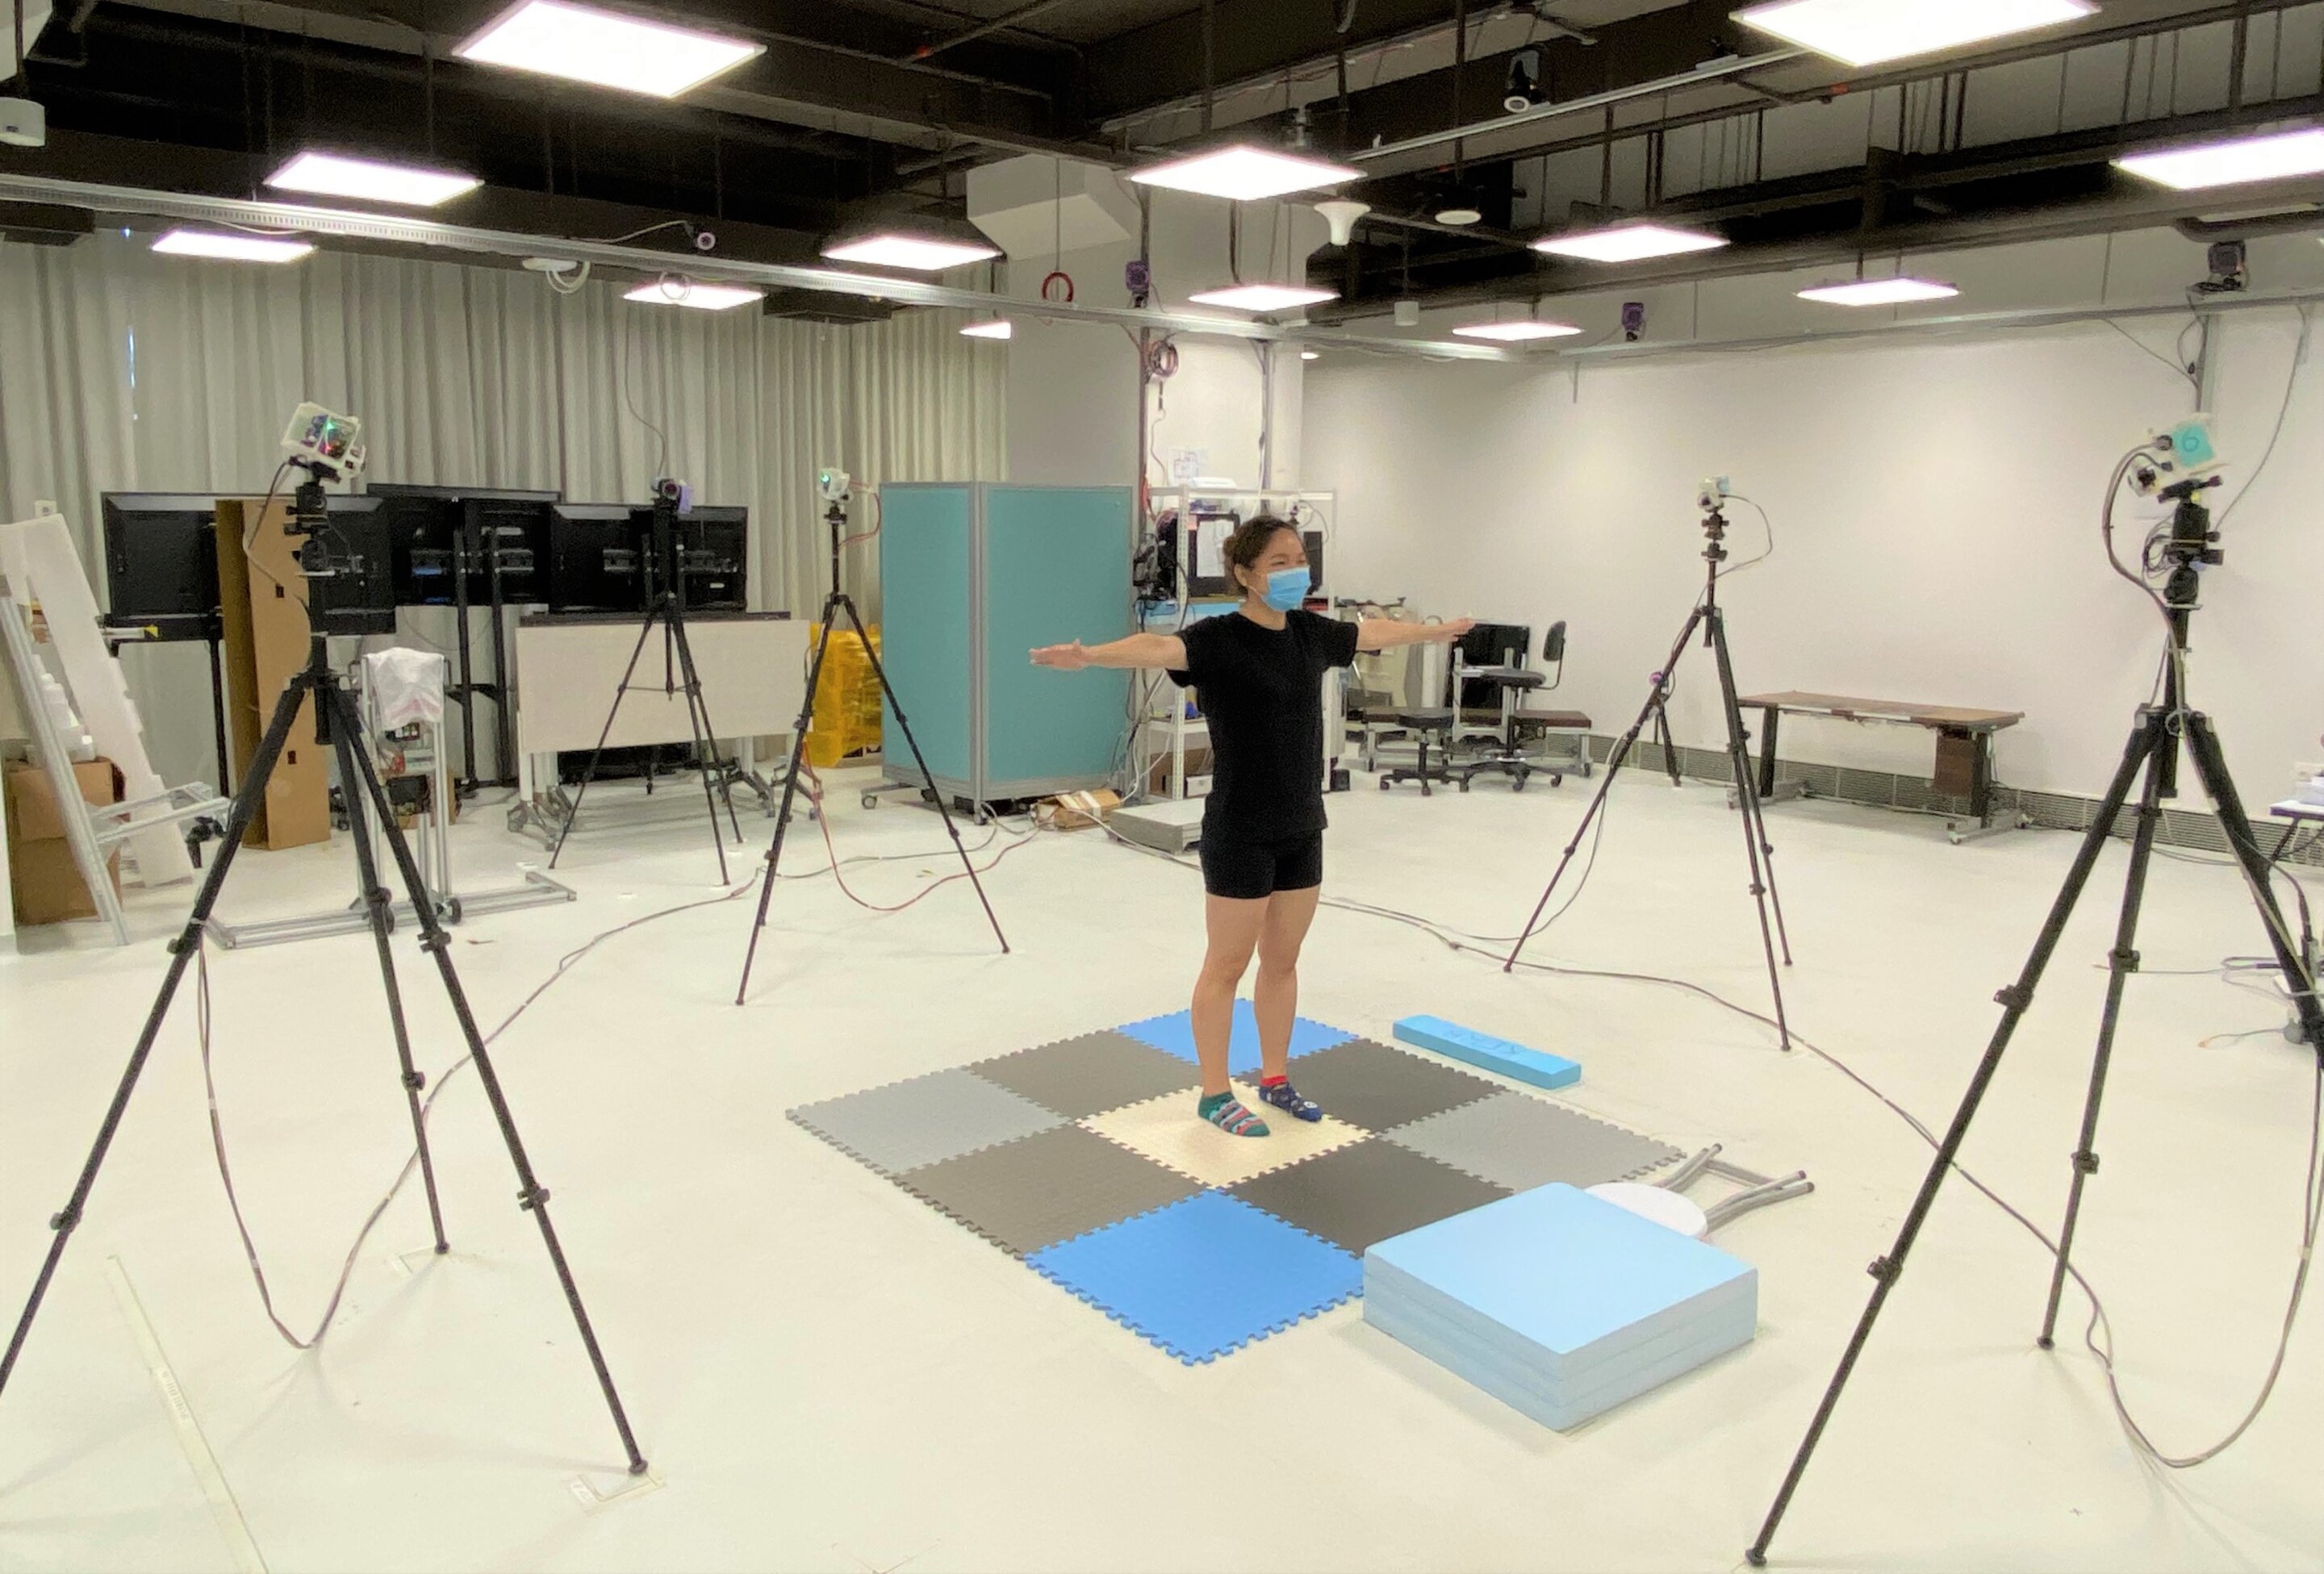 Efficient and precise motion capture system to aid in